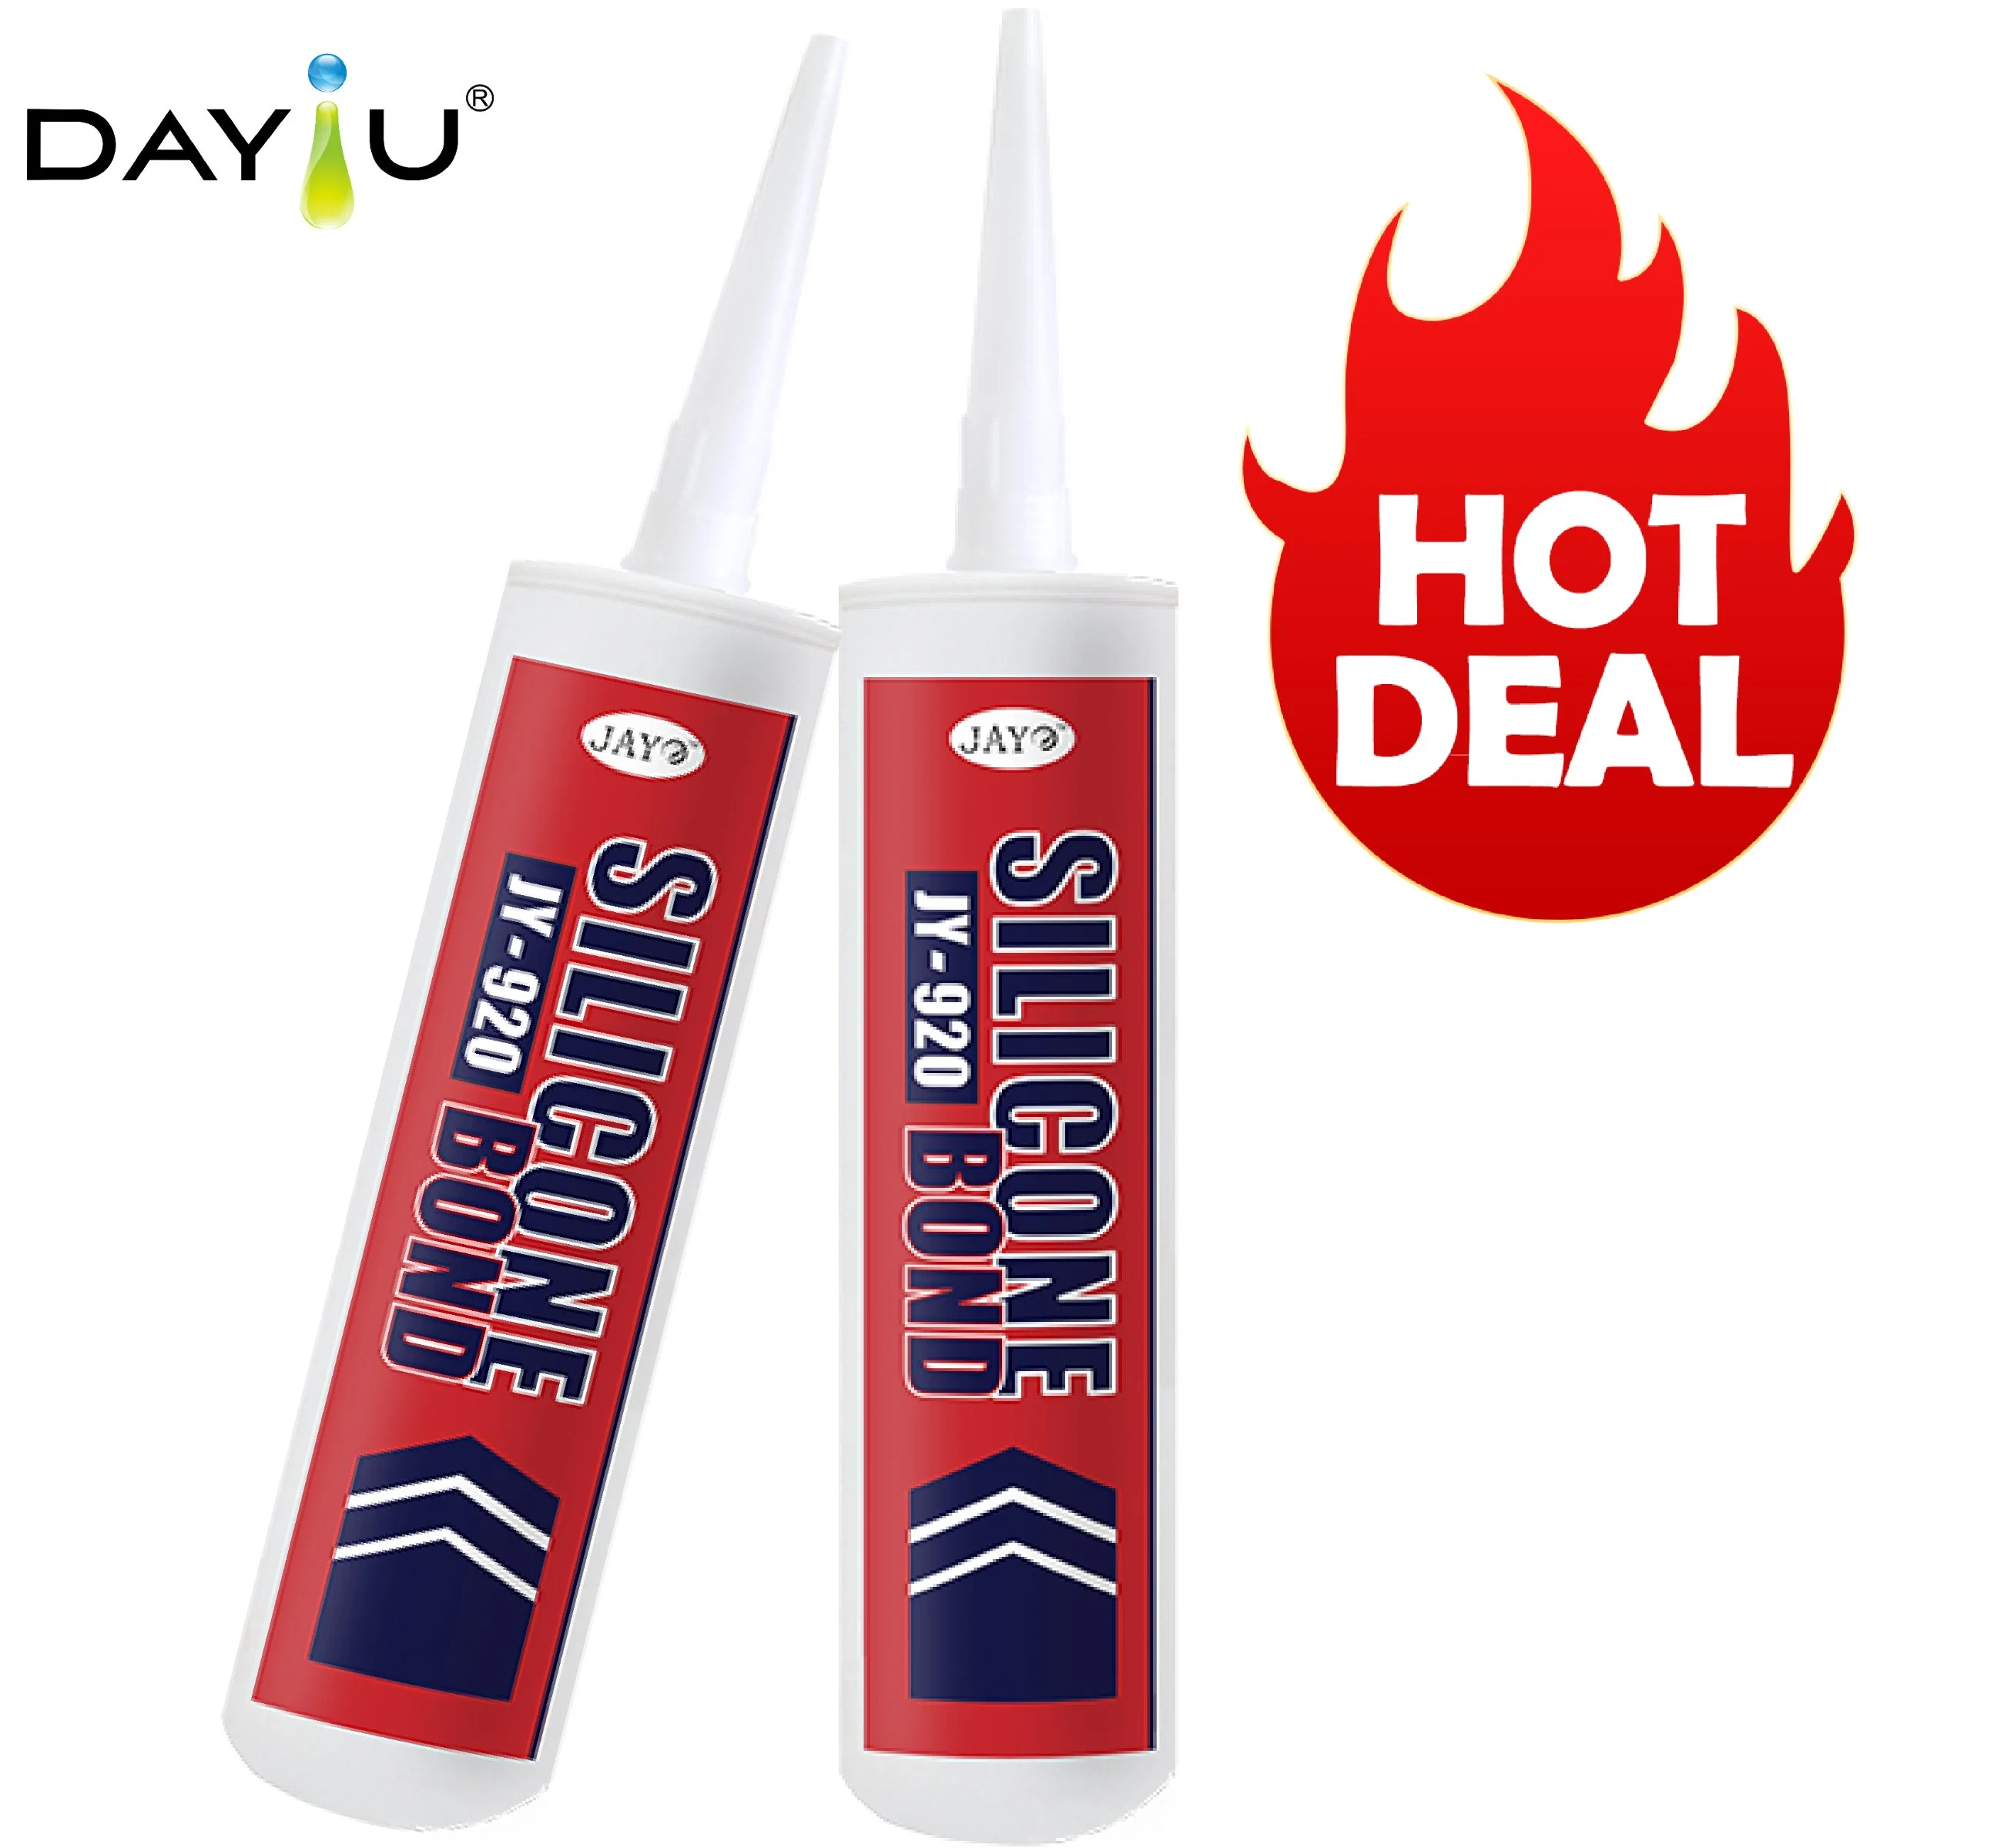 signal Component RTV Silicone Adhesive Construction Silicone Sealant Neutral Curing